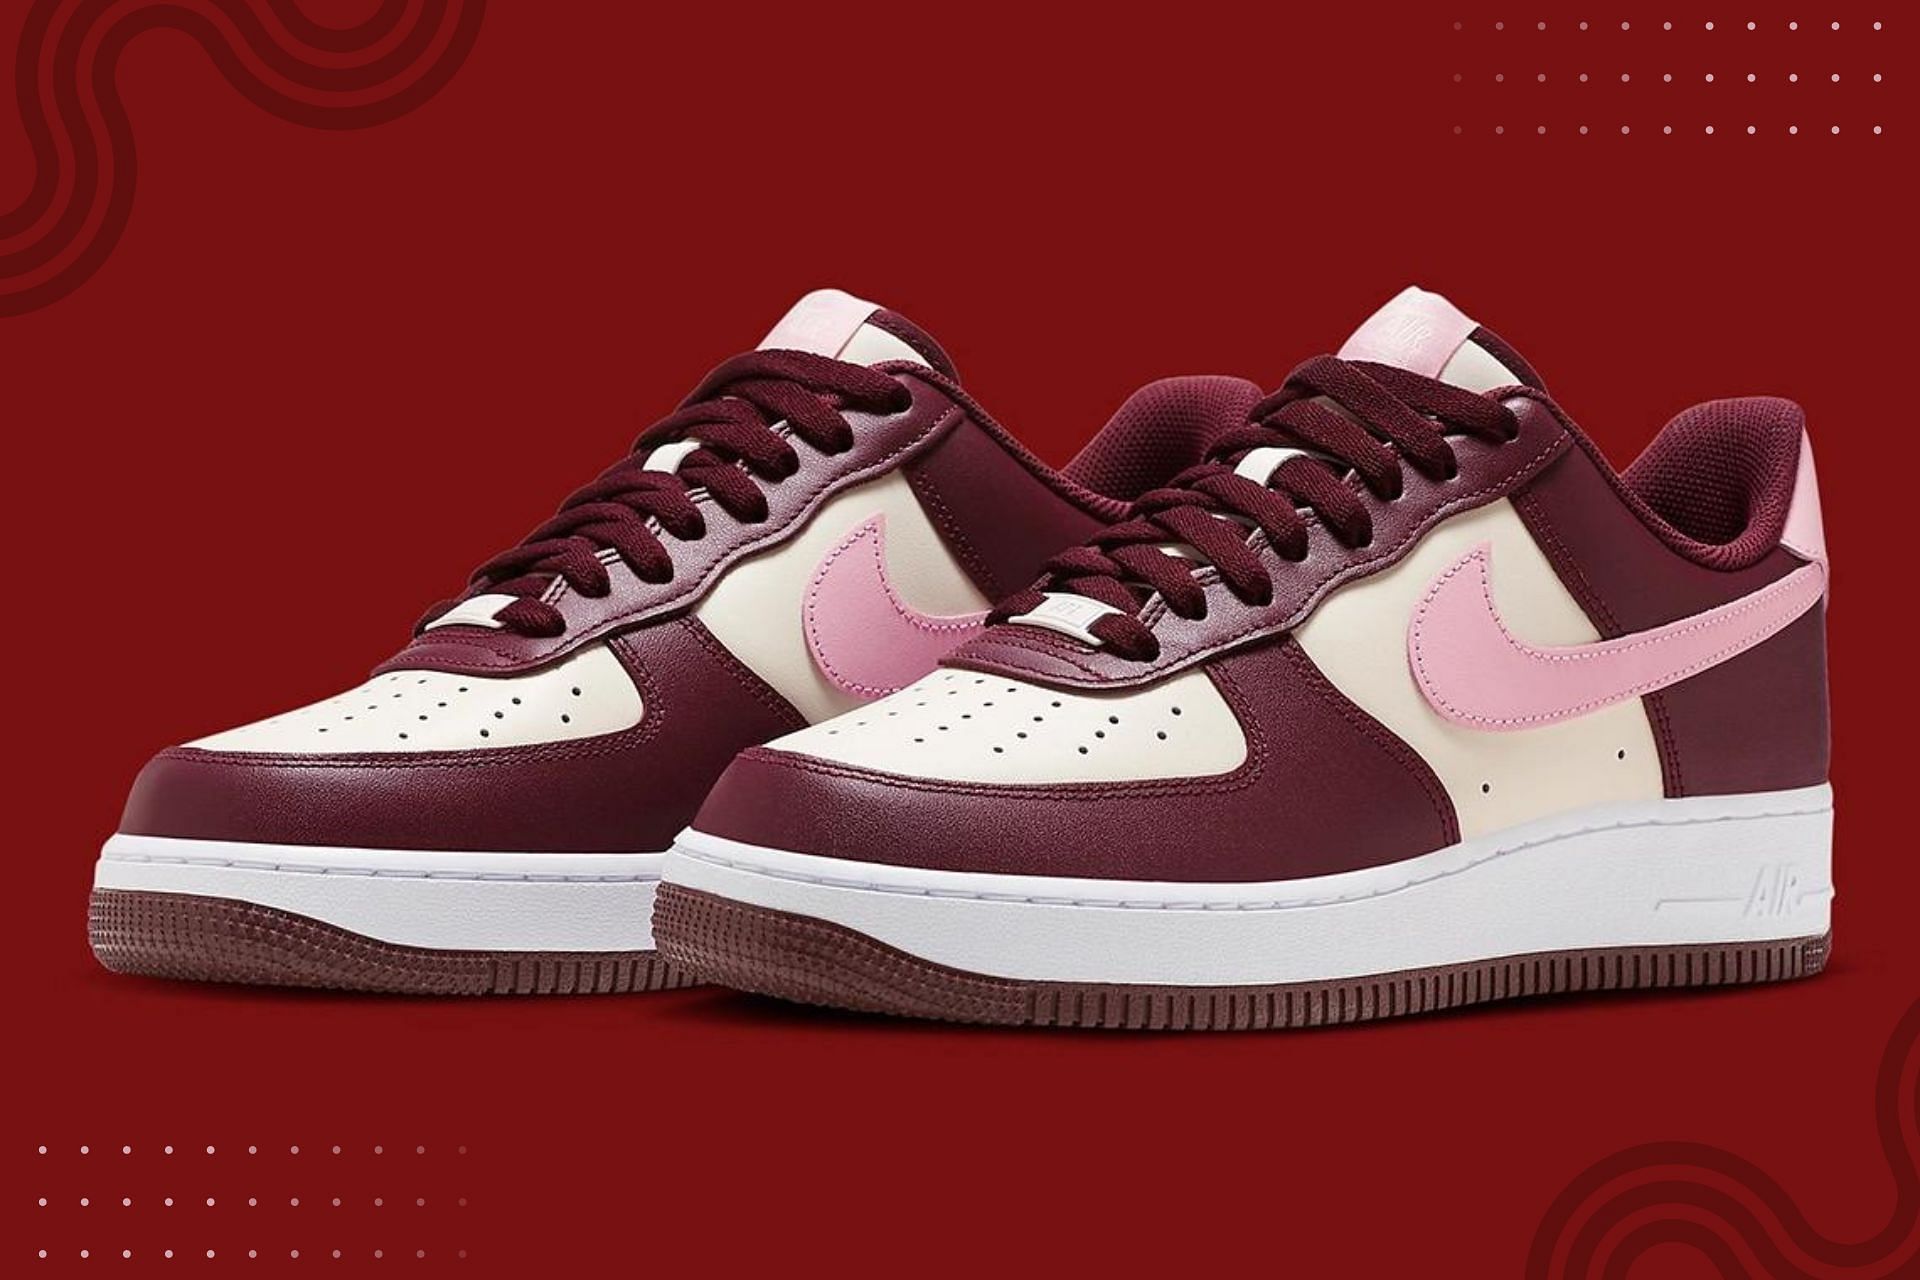 Nike air valentines day. Nike Air Force 1 Low “Valentine’s Day” 2023. Nike Air Force Valentines Day 2023. Nike Air Force 1 Low Valentine s Day 2023. Nike Air Force 1 Valentine's Day 2023.